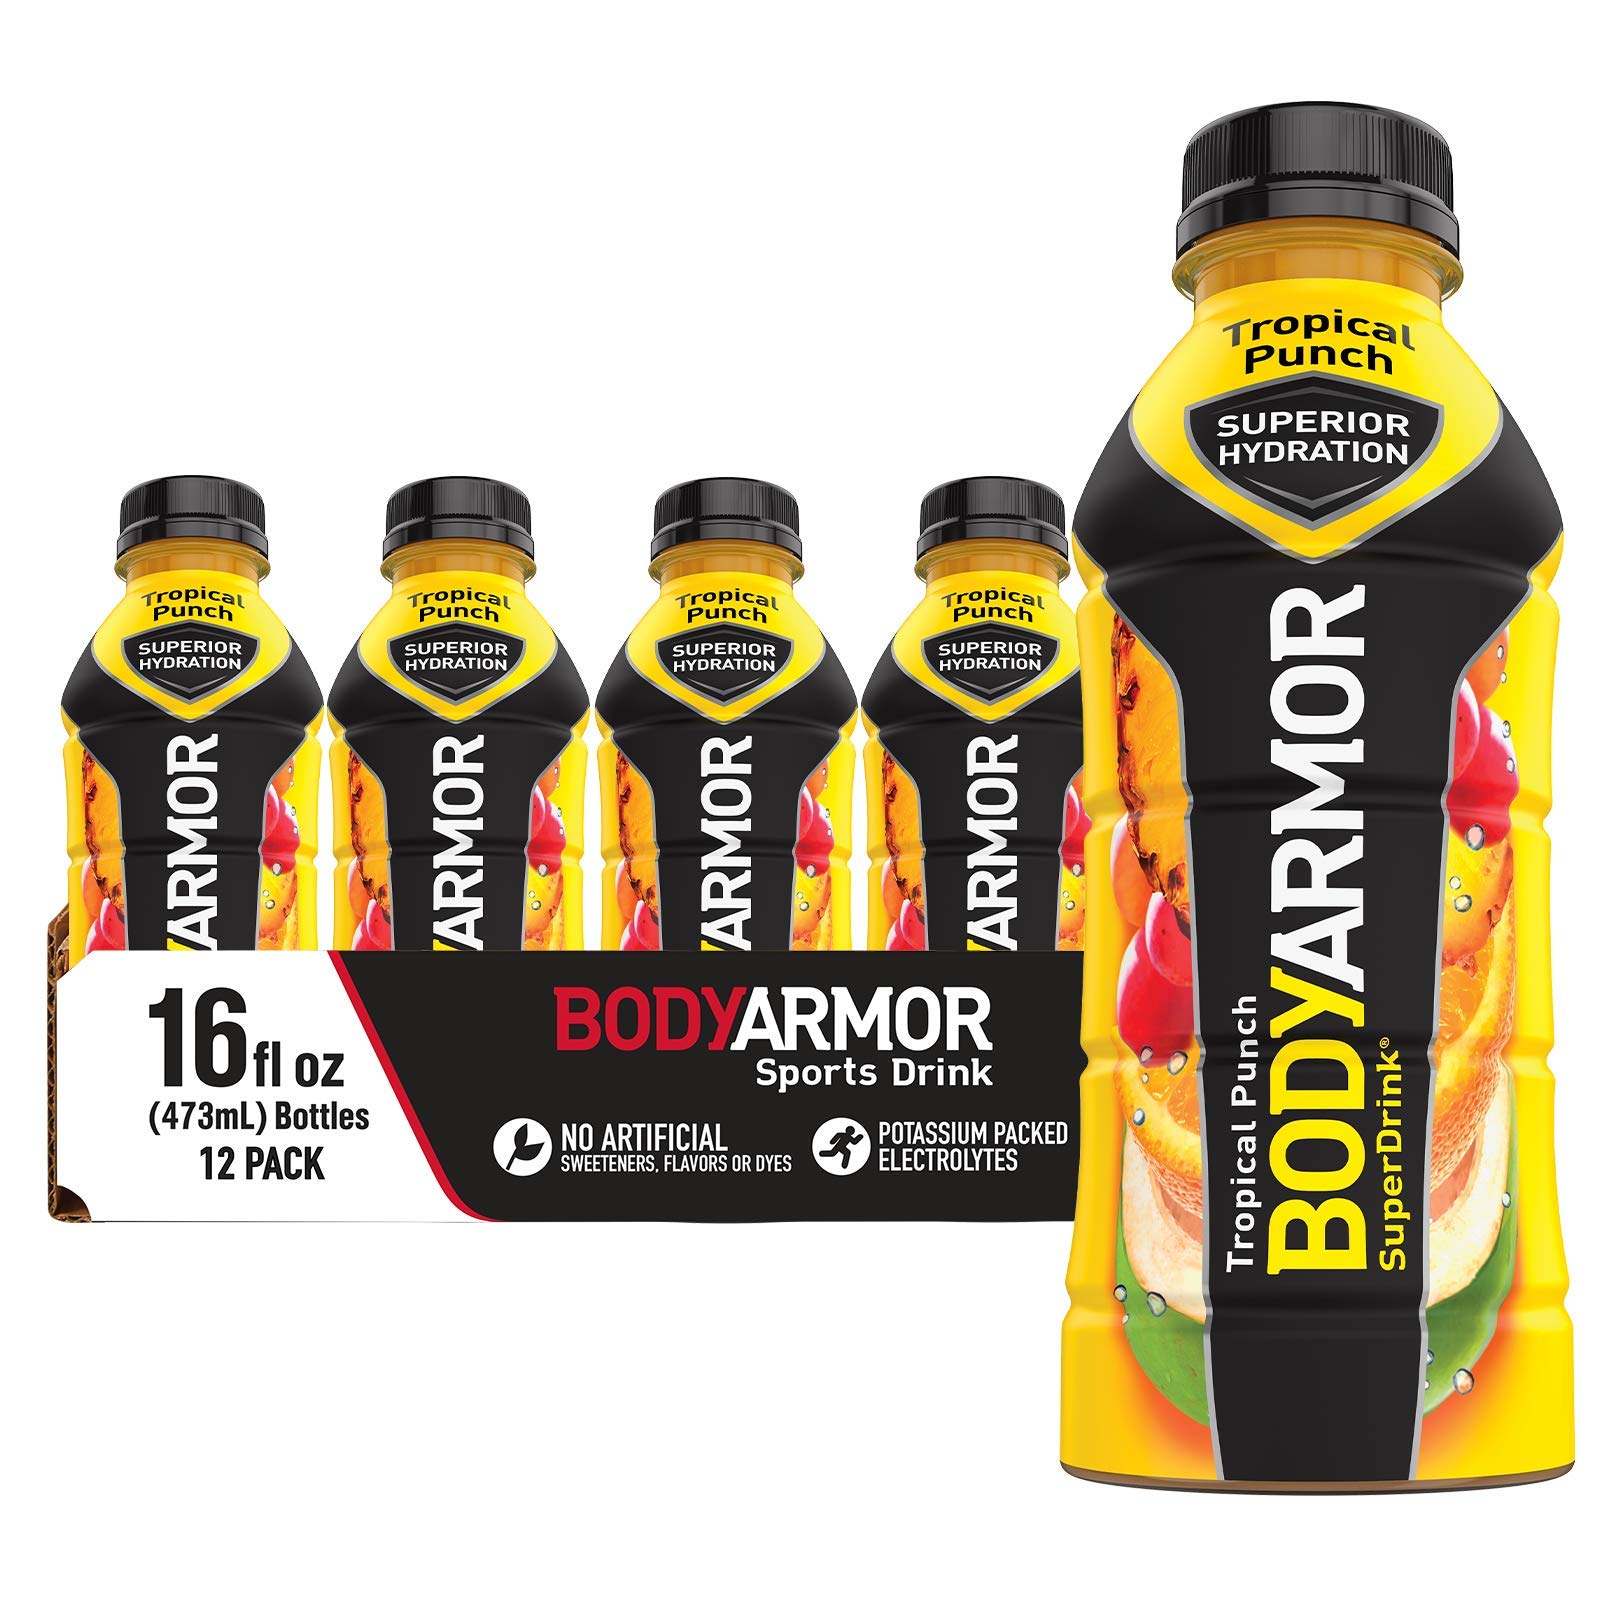 12-Pack 16-Oz BODYARMOR Sports Drink (Tropical Punch) $10.03 w/ S&S + Free Shipping w/ Prime or on orders over $35